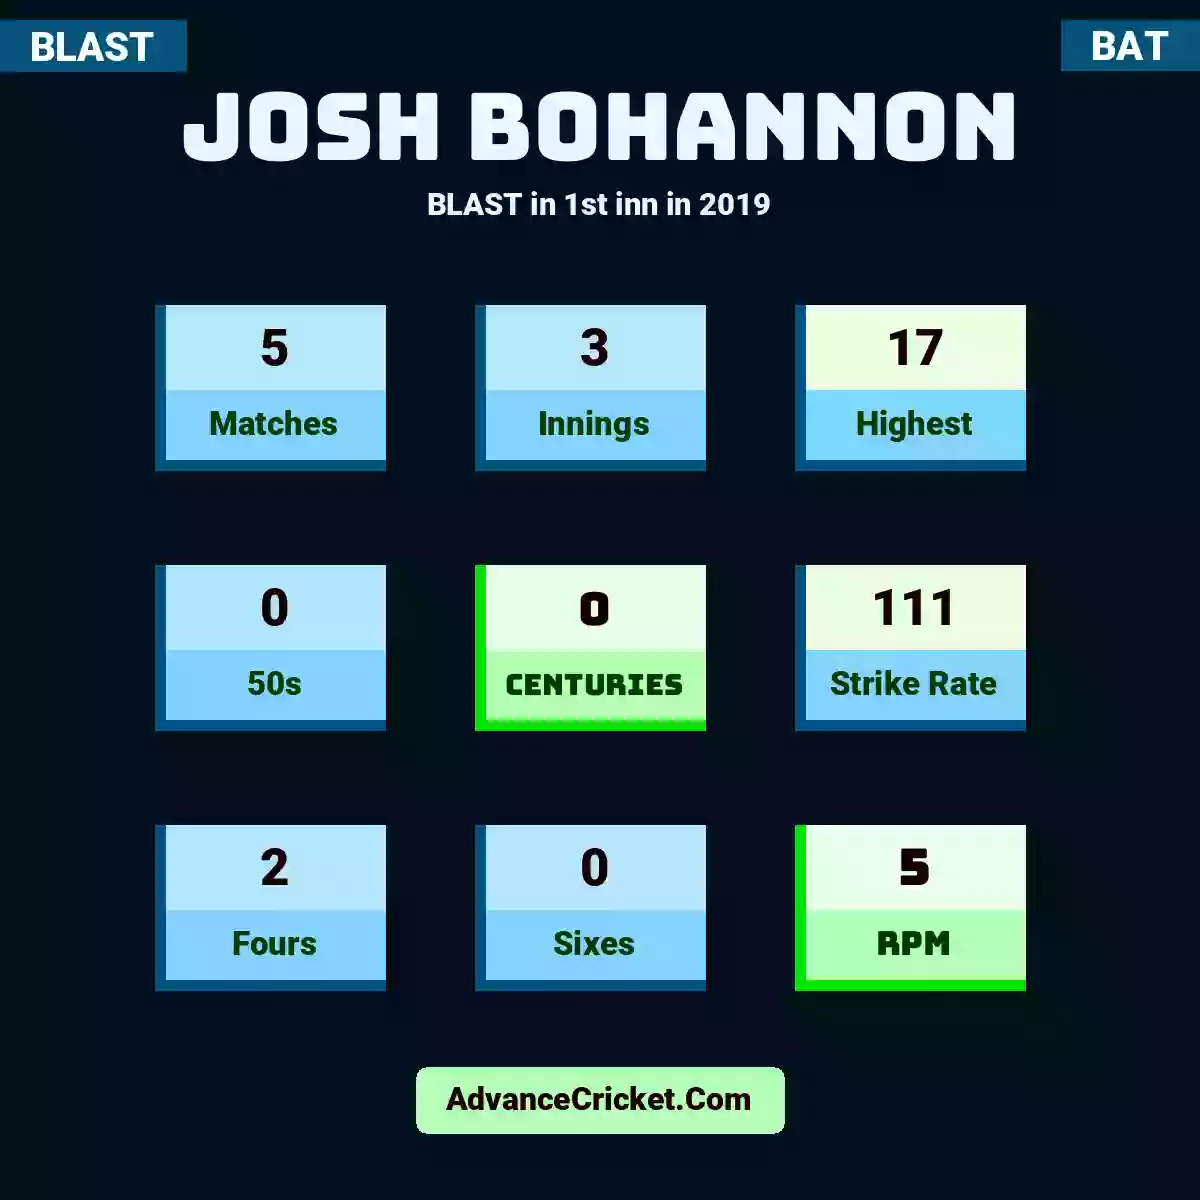 Josh Bohannon BLAST  in 1st inn in 2019, Josh Bohannon played 5 matches, scored 17 runs as highest, 0 half-centuries, and 0 centuries, with a strike rate of 111. J.Bohannon hit 2 fours and 0 sixes, with an RPM of 5.